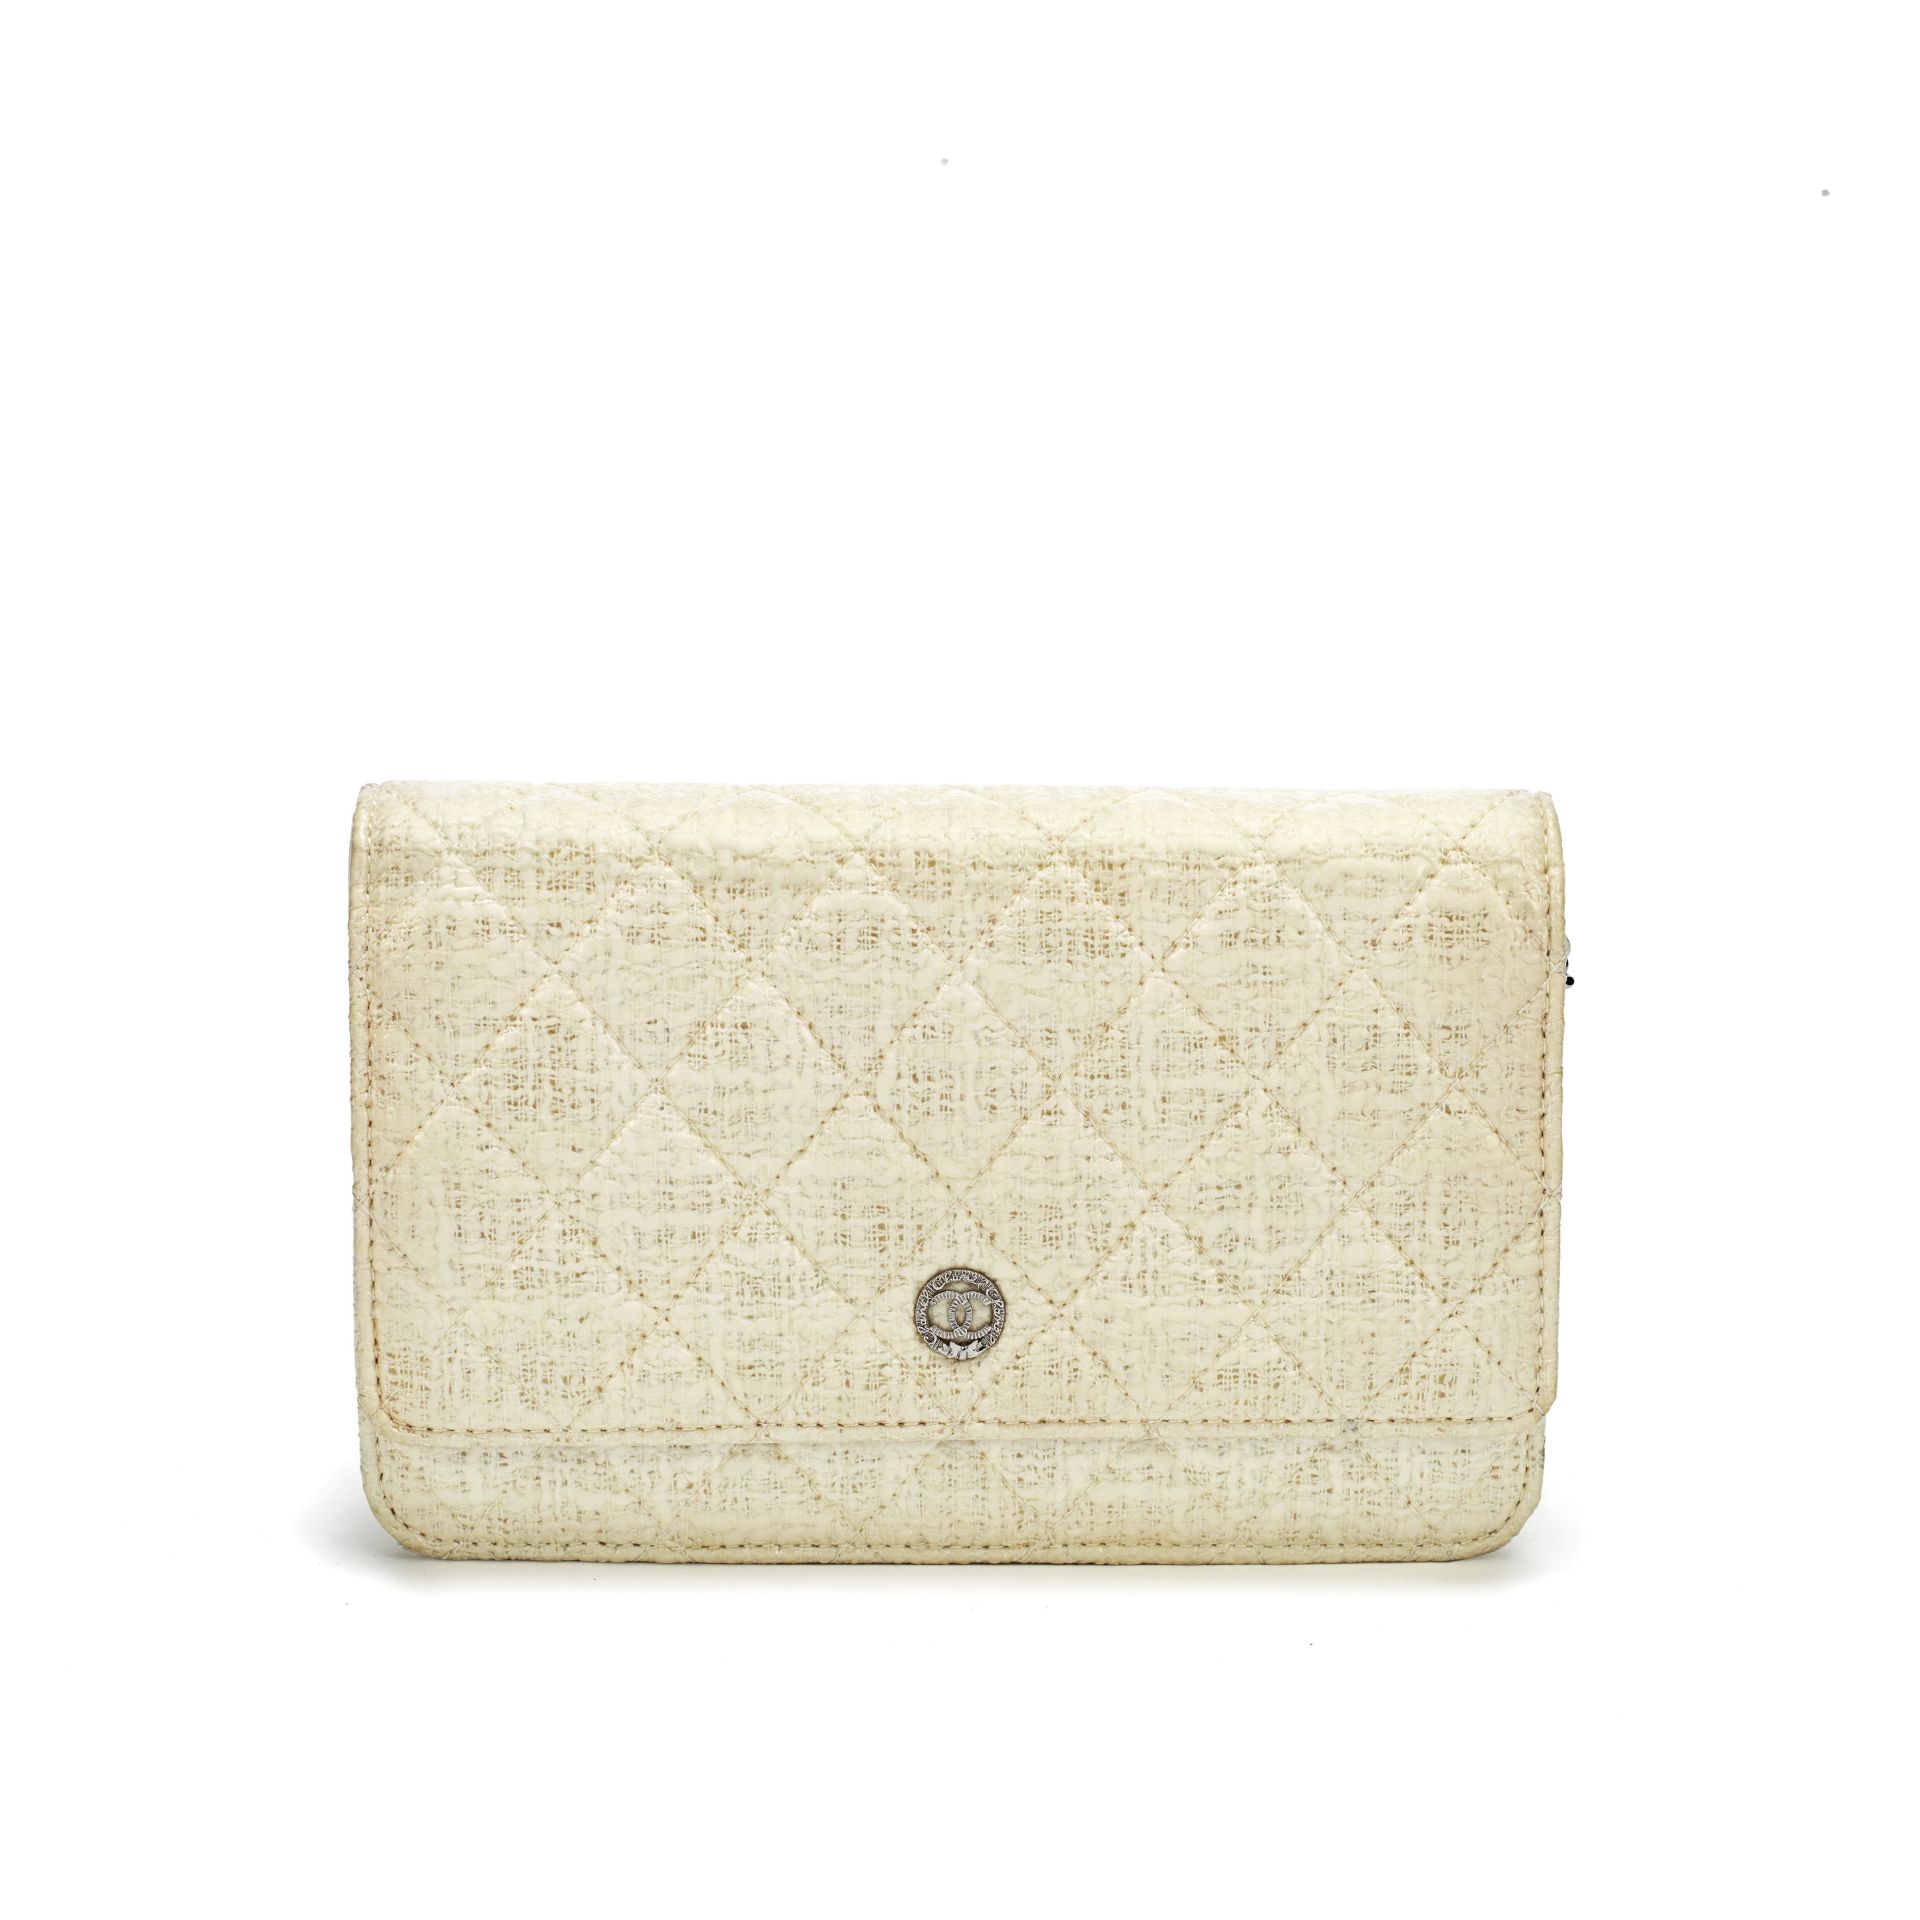 Cream Coated Tweed Wallet on Chain (WOC), Chanel, c. 2012-13, (Includes serial sticker and dust bag)